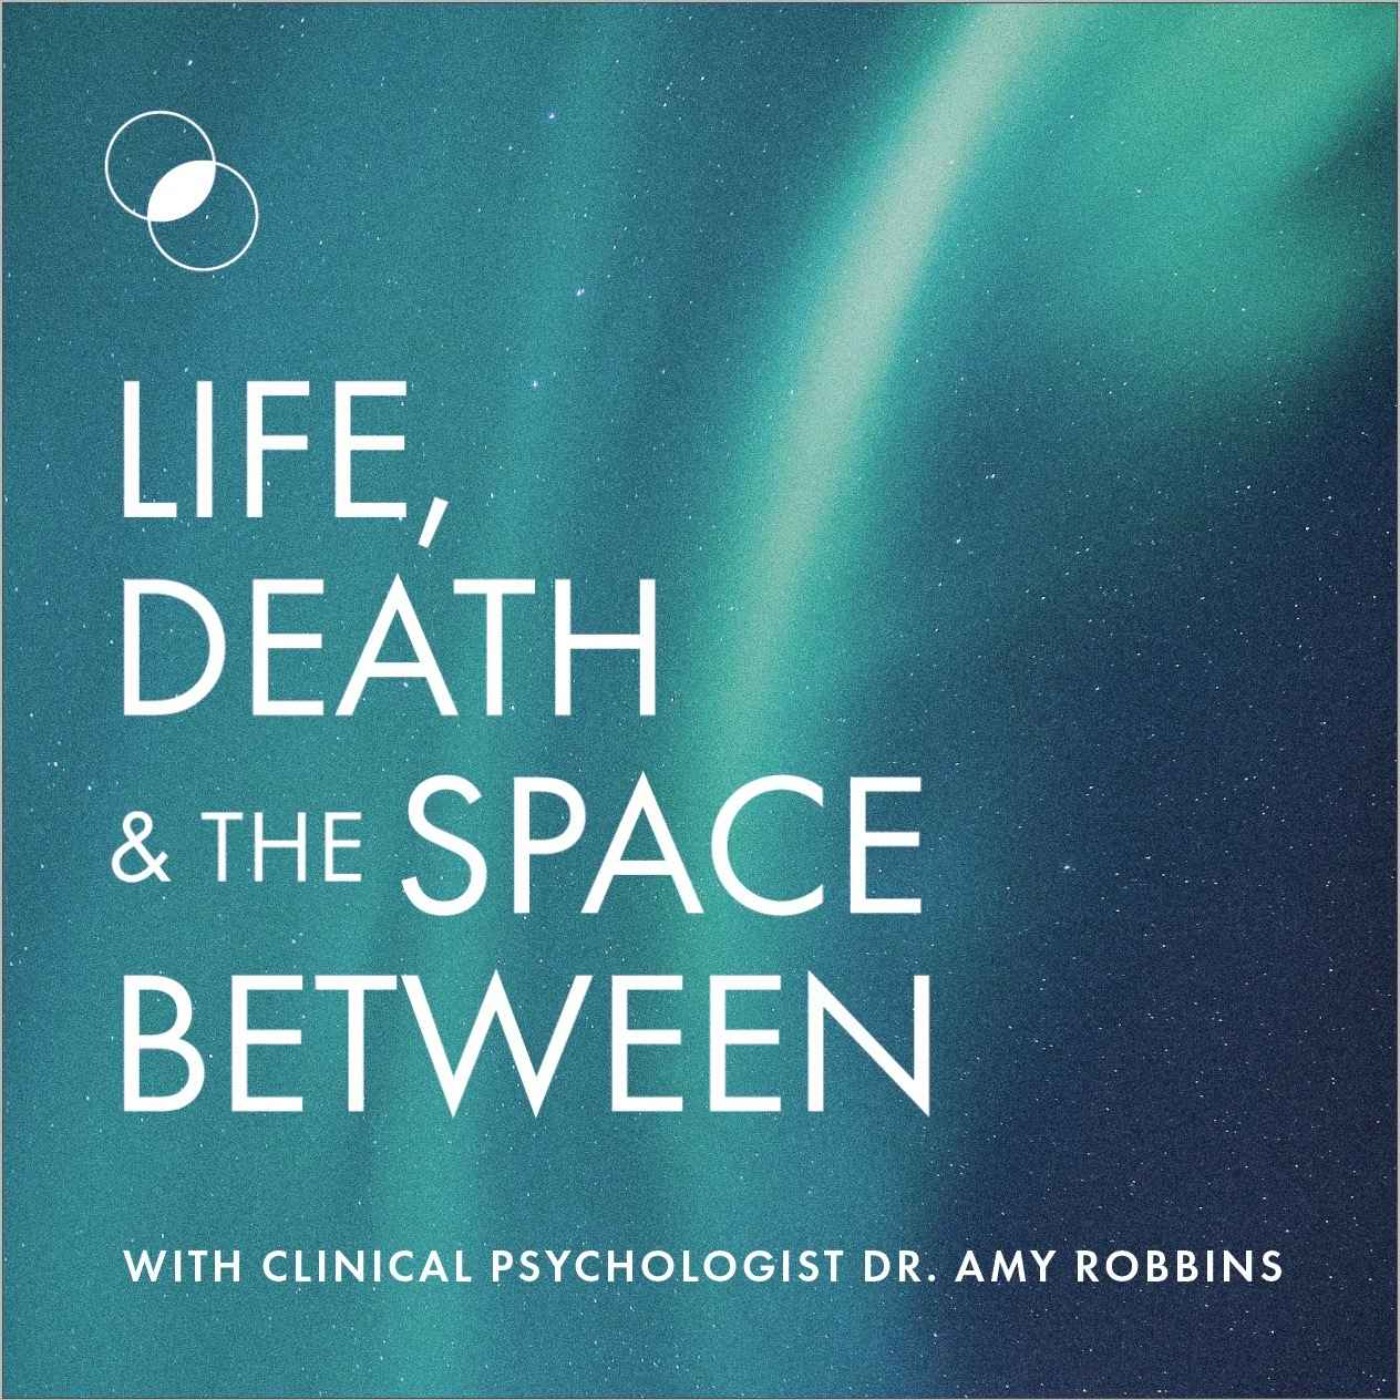 Life, Death & The Space Between with Dr. Amy Robbins